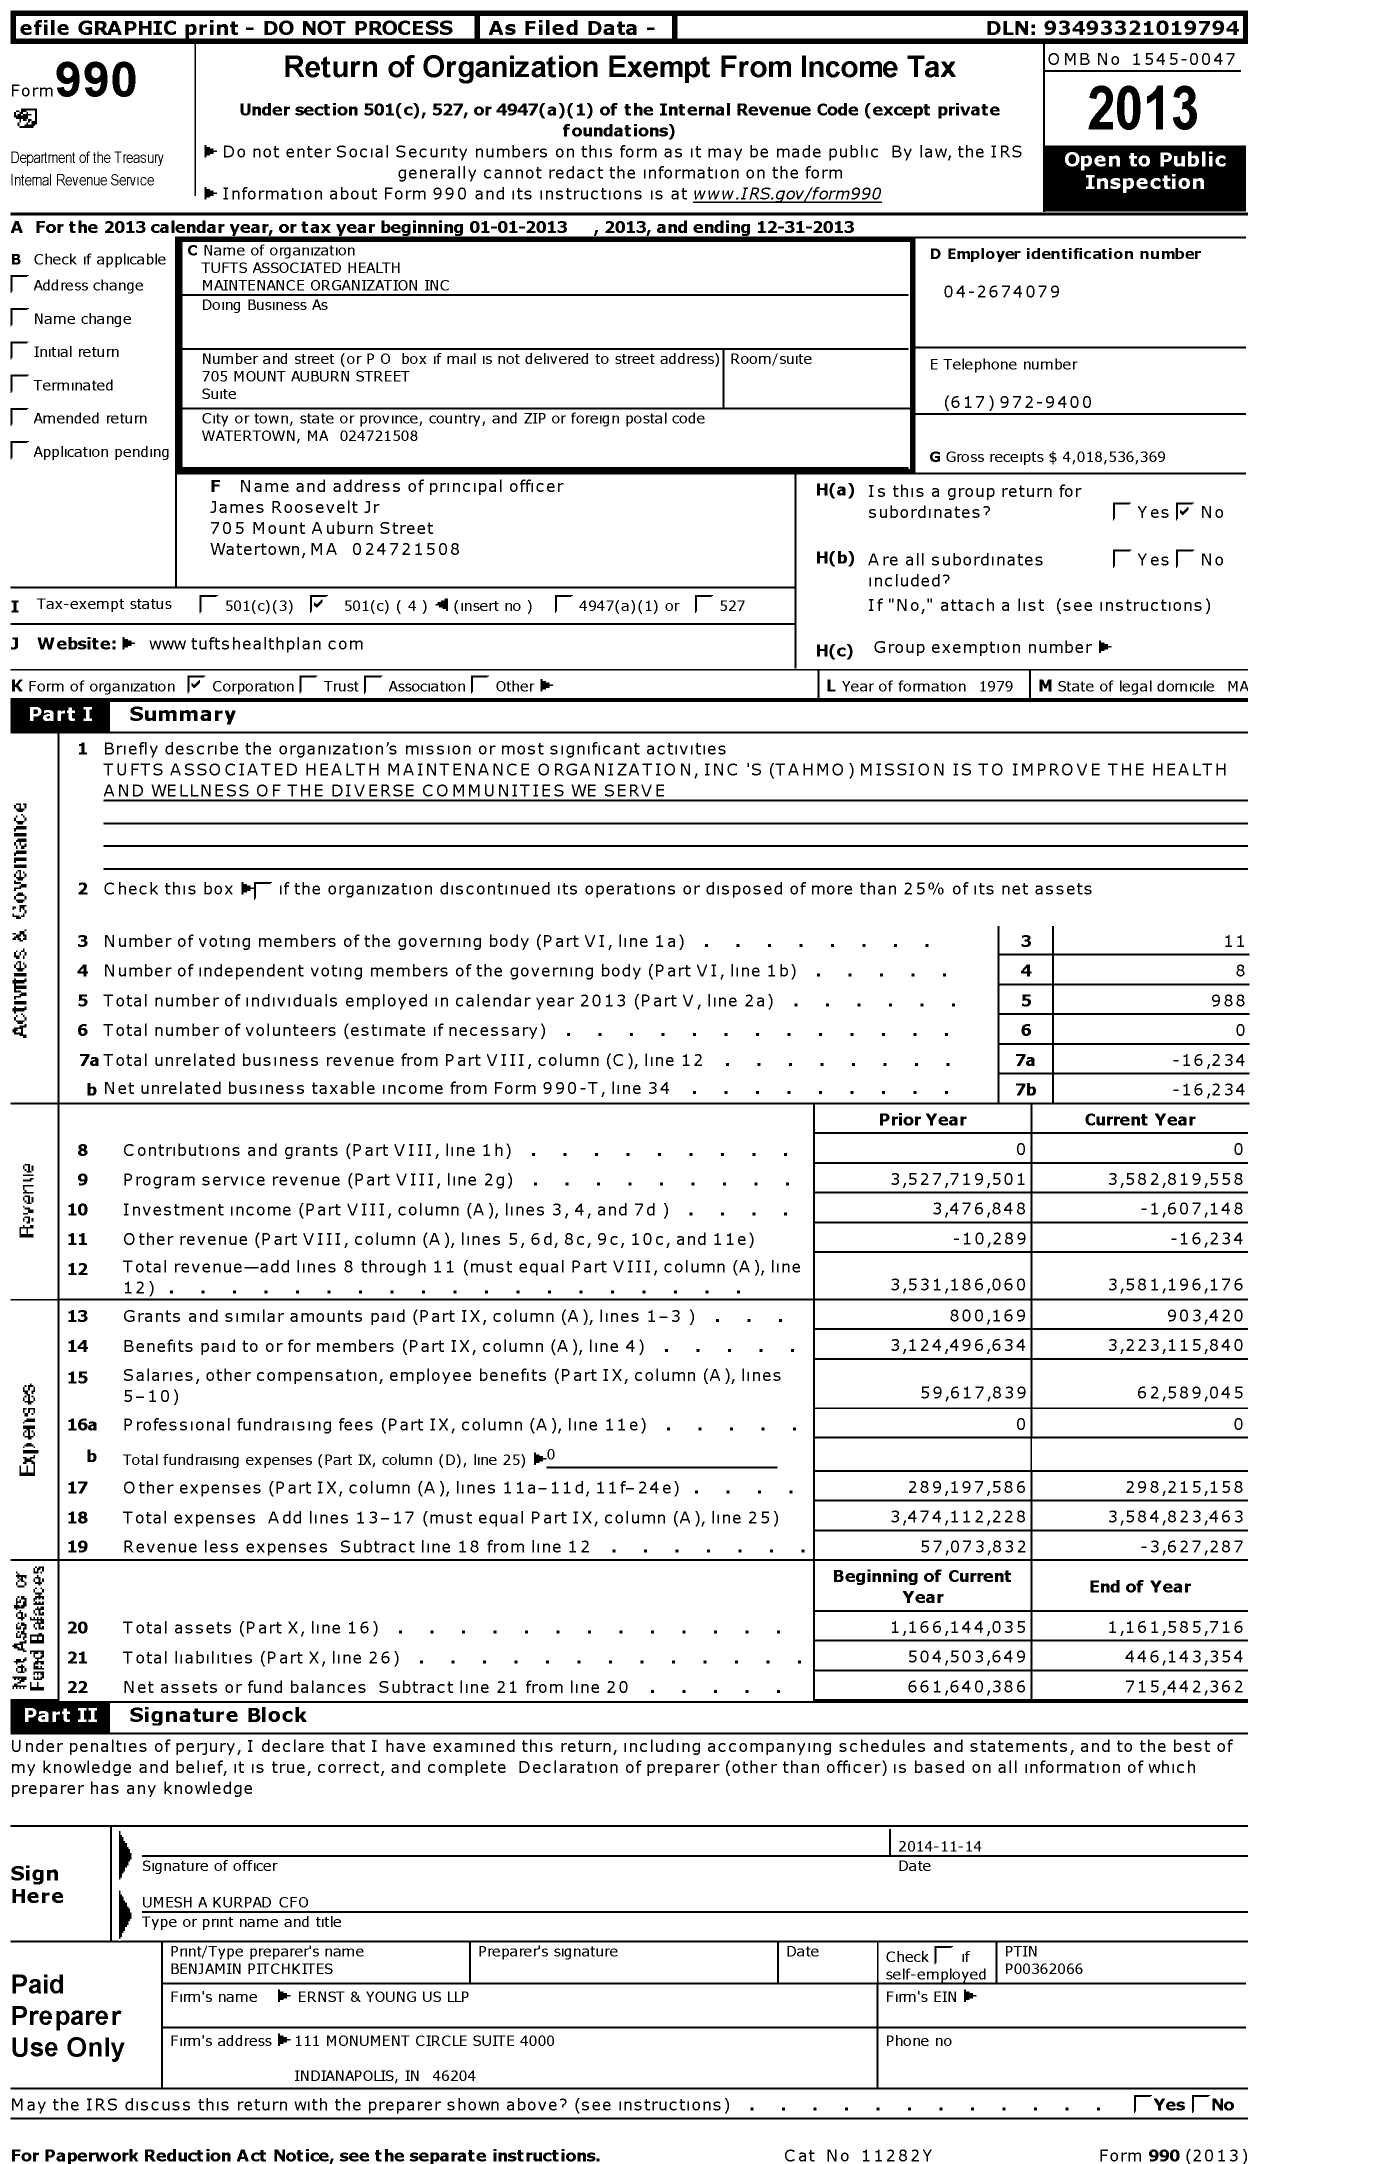 Image of first page of 2013 Form 990O for Tufts Associated Health Maintenance Organization